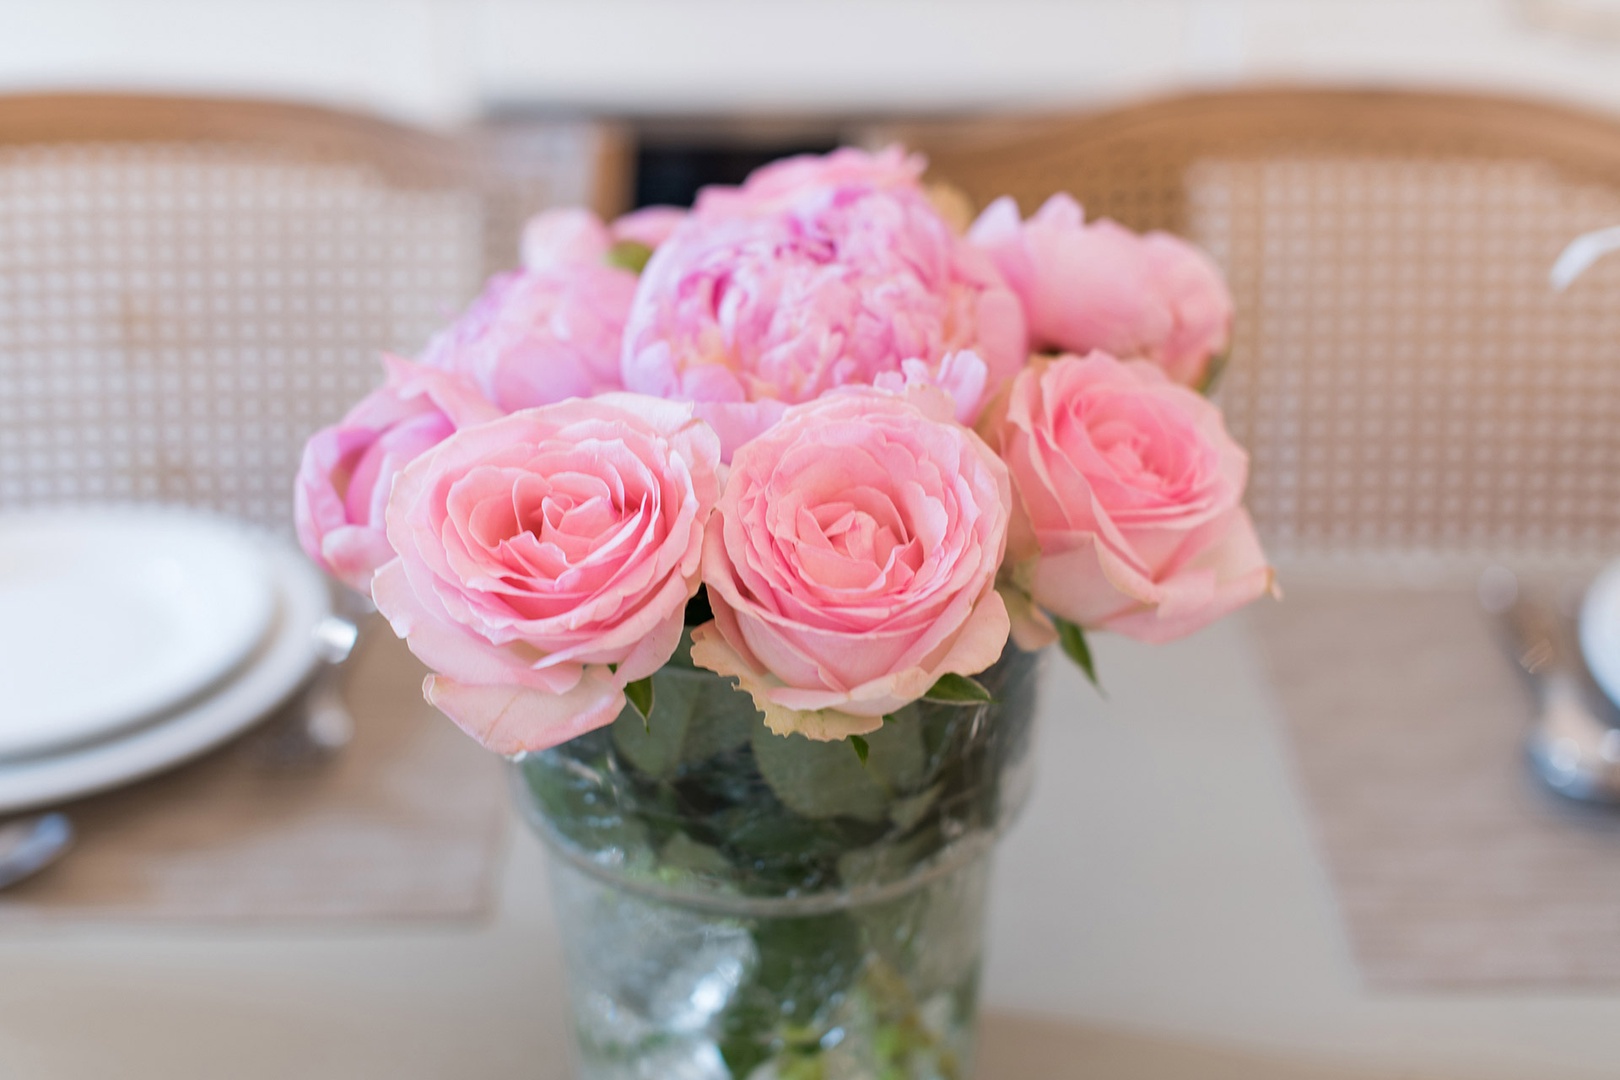 Pick up flowers from the nearby market to decorate your table.